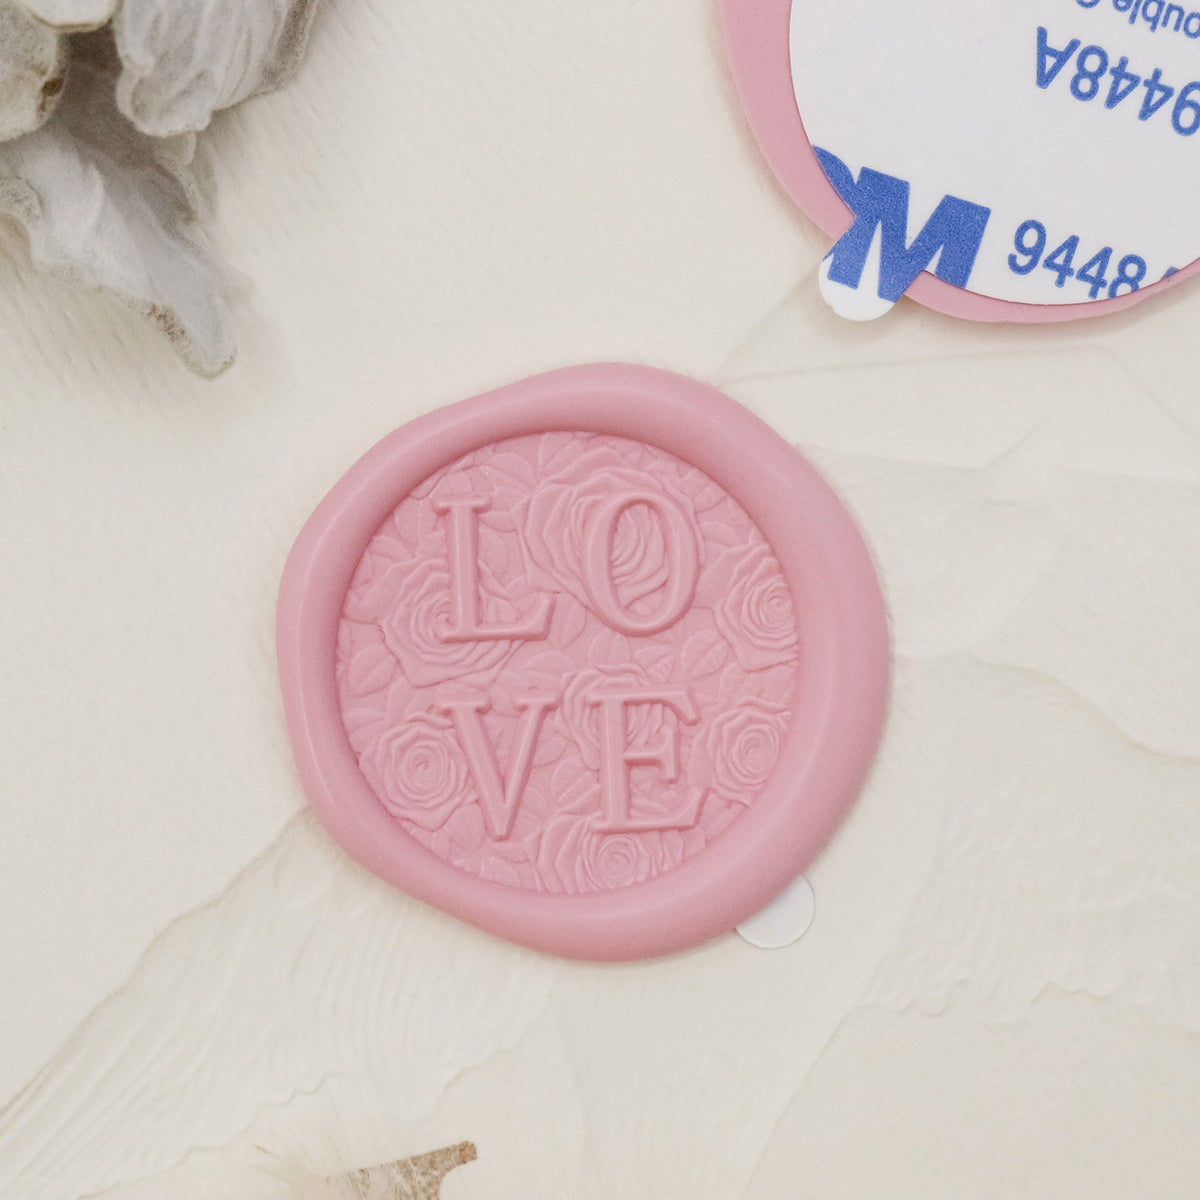 Stamprints 3D Relief Love Self-adhesive Wax Seal Stickers 1